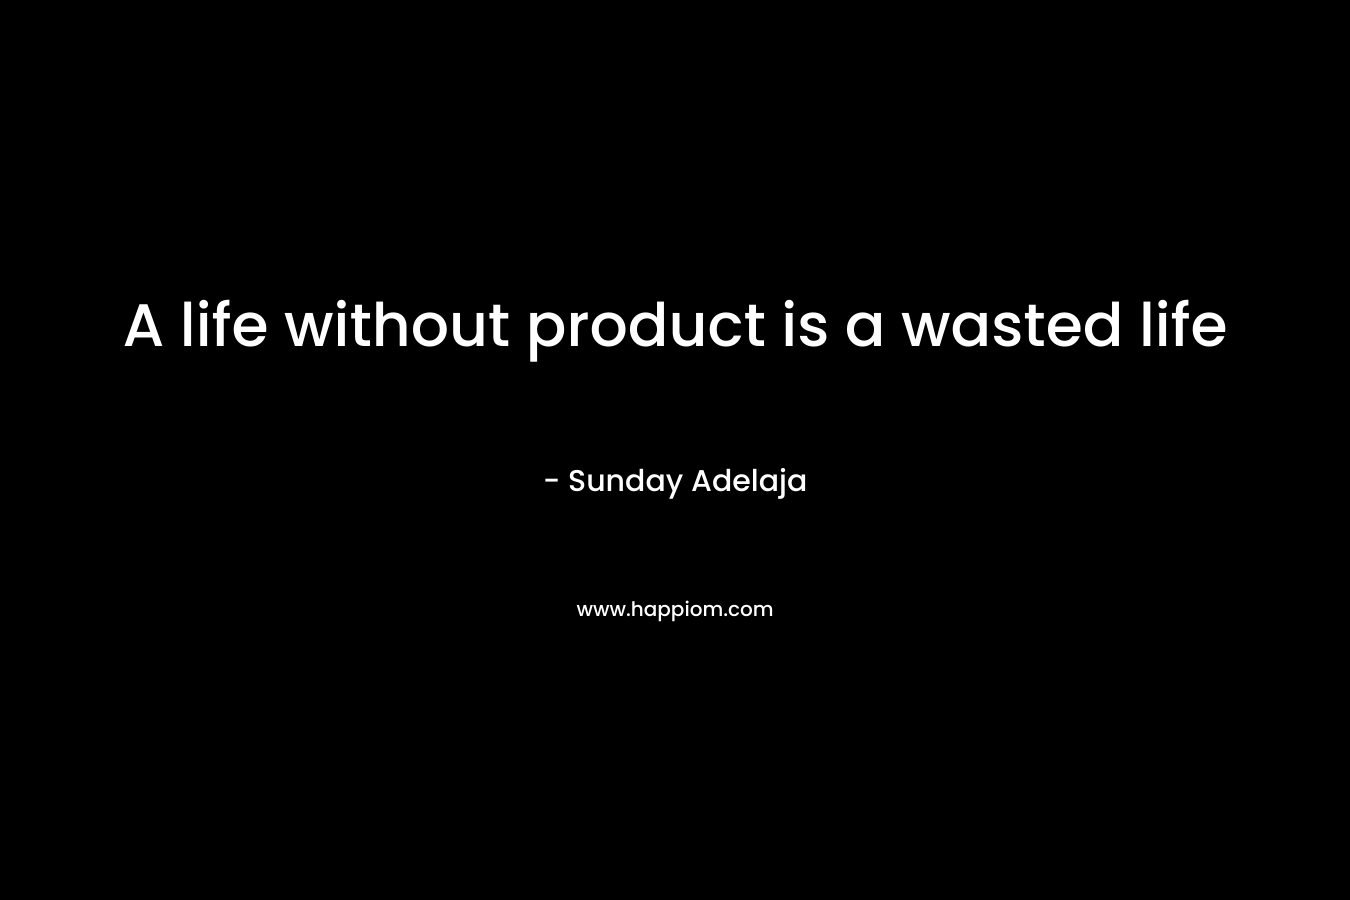 A life without product is a wasted life